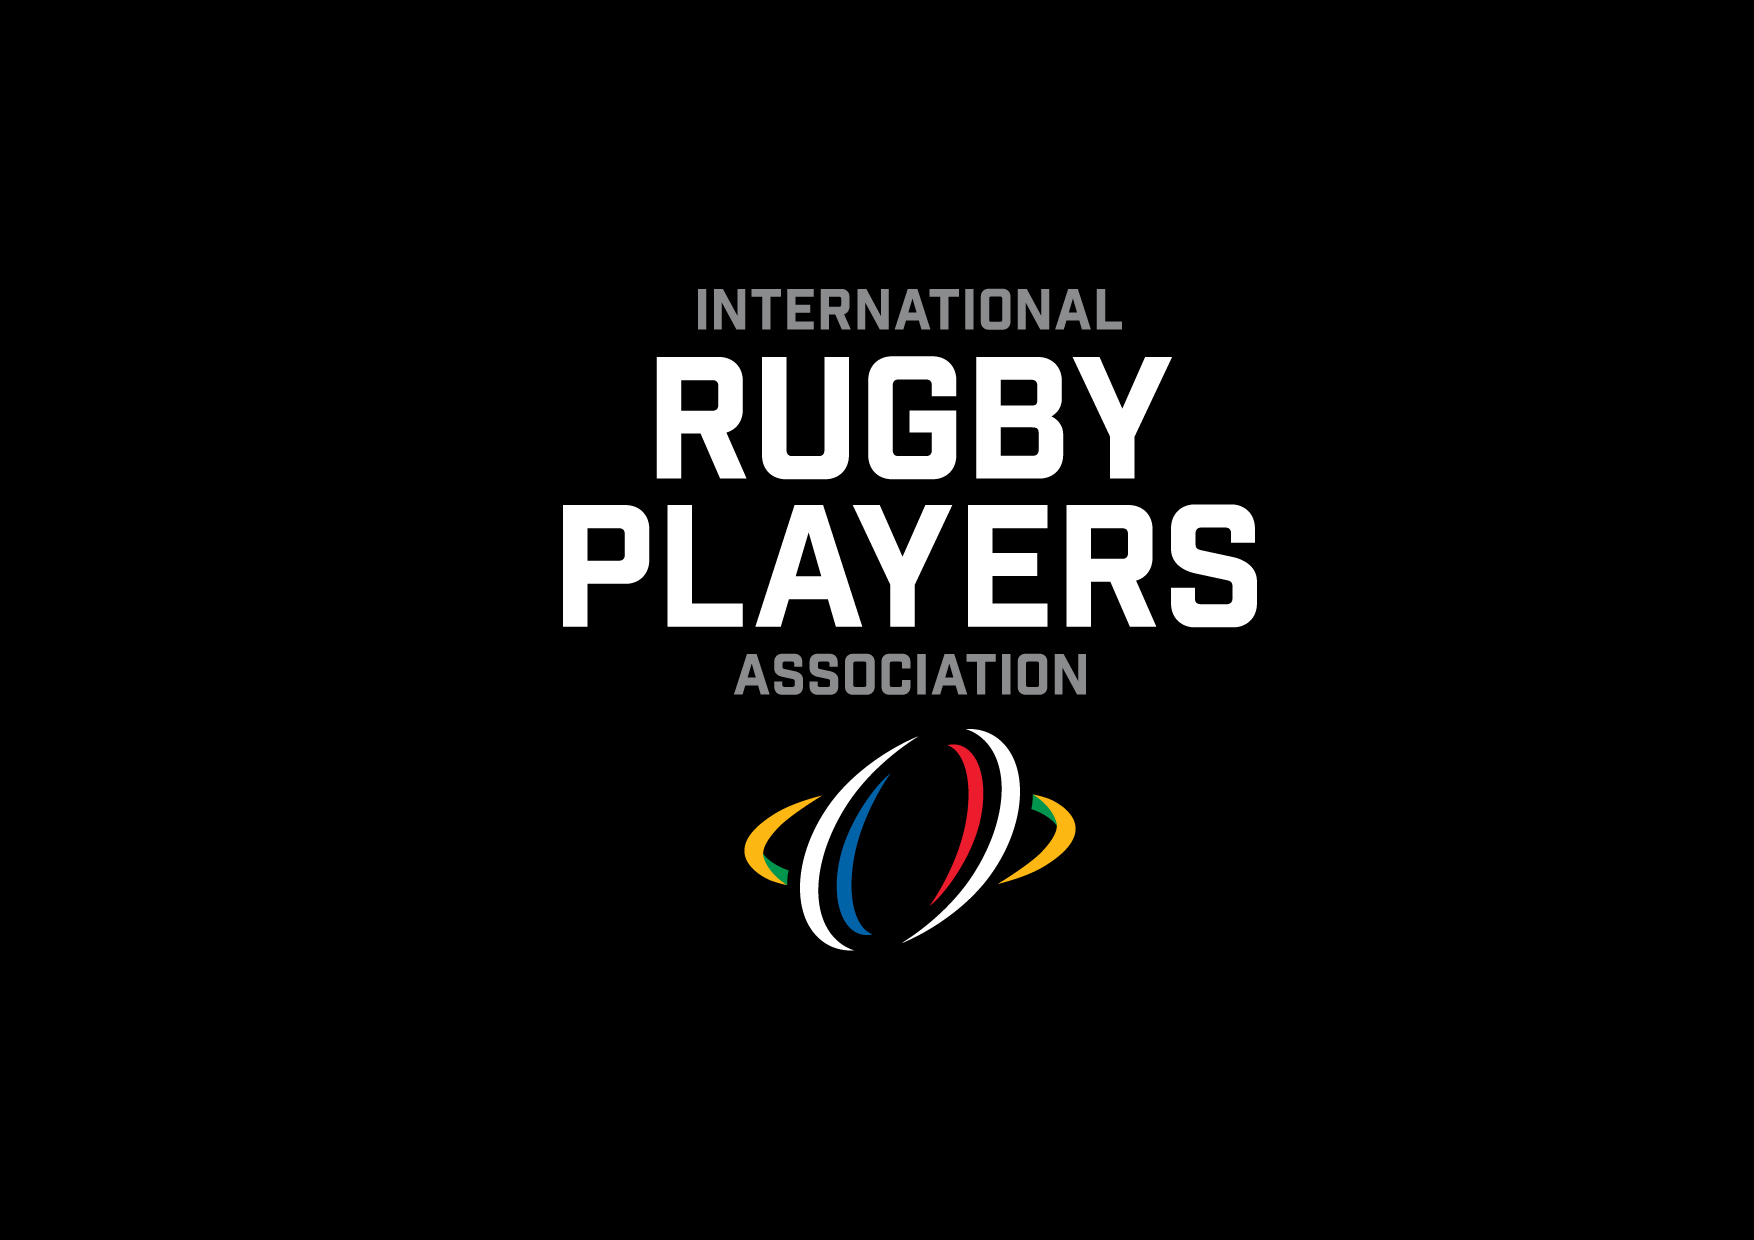 McCaw and Sexton spearhead deal with world rugby for international rugby players association